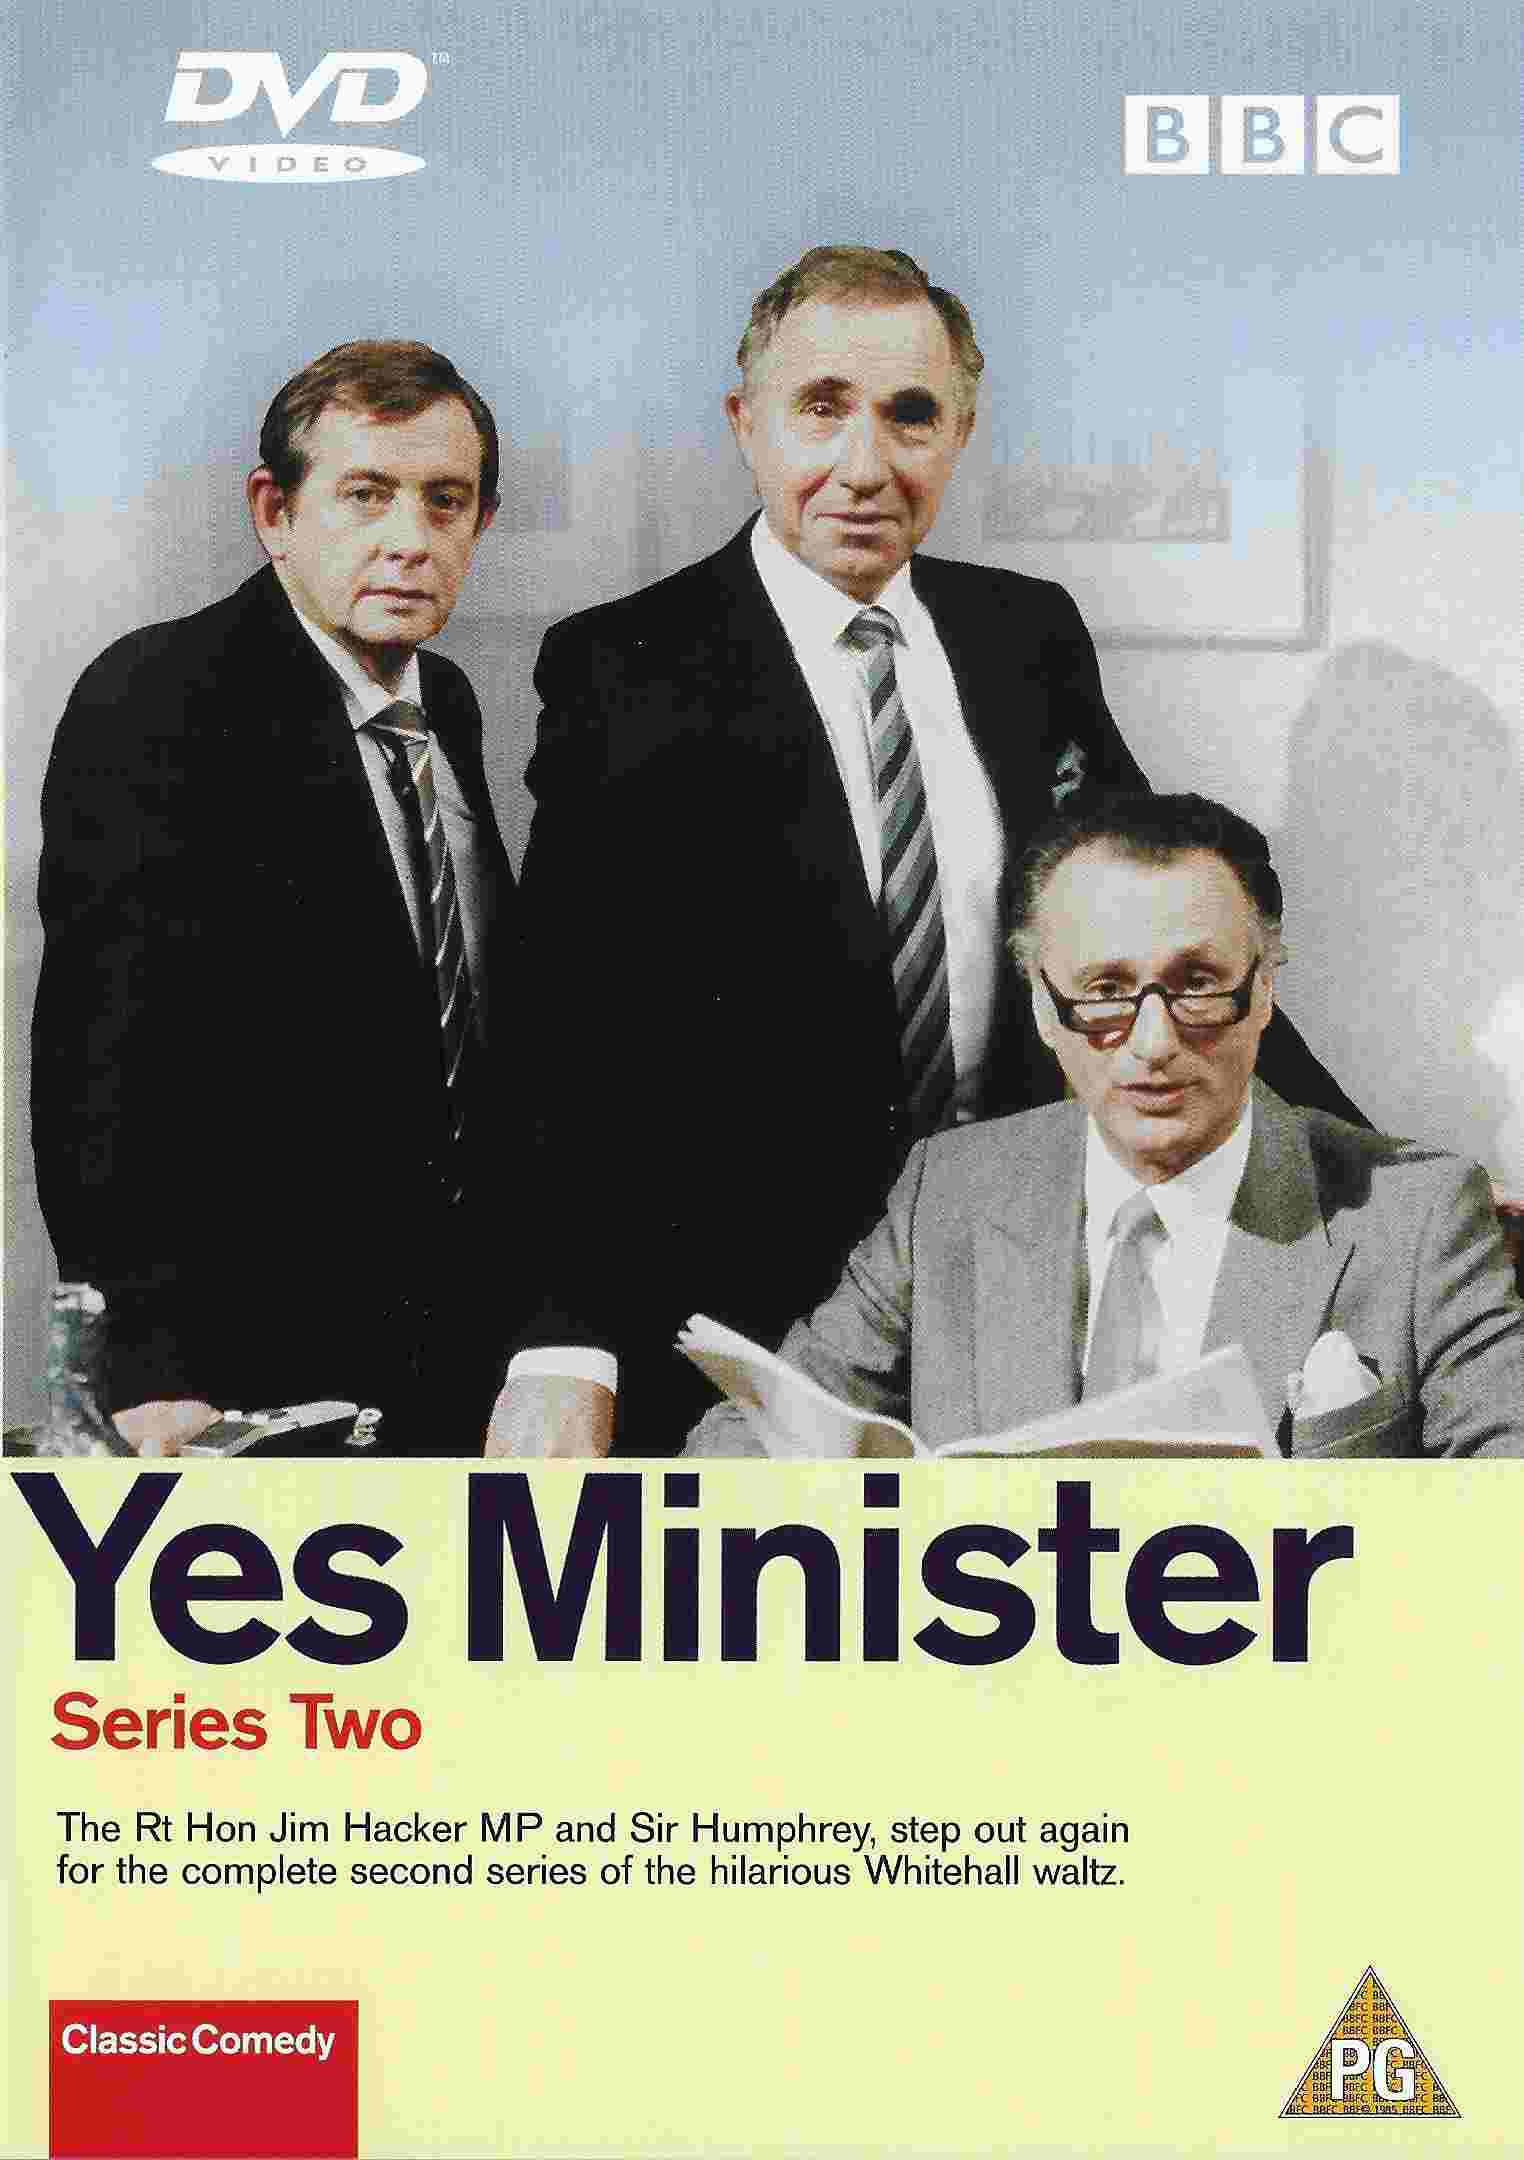 Picture of BBCDVD 1120 Yes Minister - Series Two by artist Antony Jay / Jonathan Lynn from the BBC dvds - Records and Tapes library